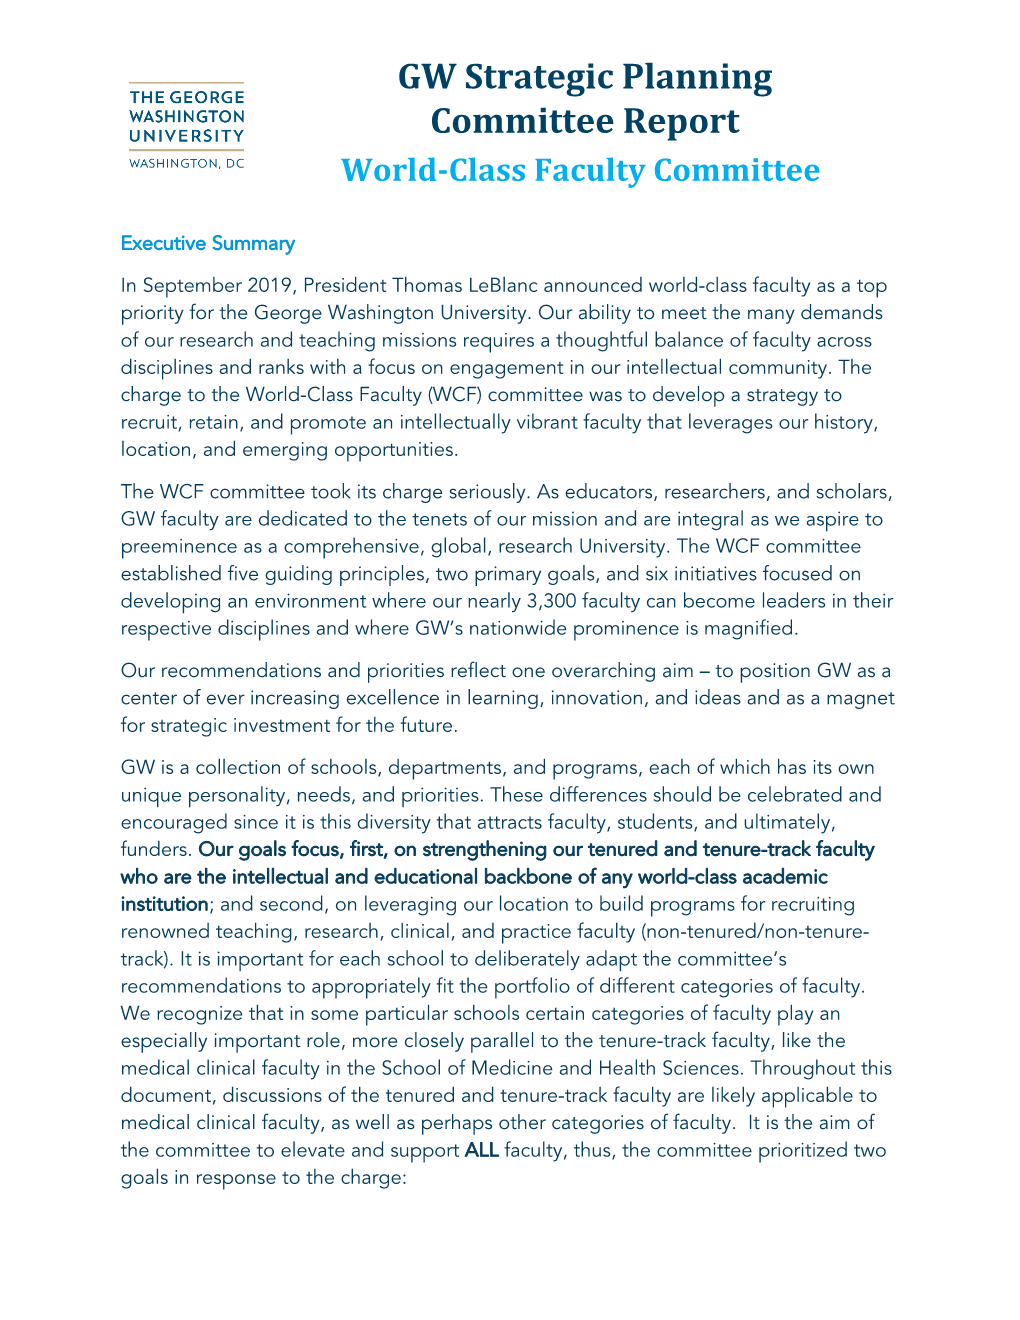 World-Class Faculty Committee